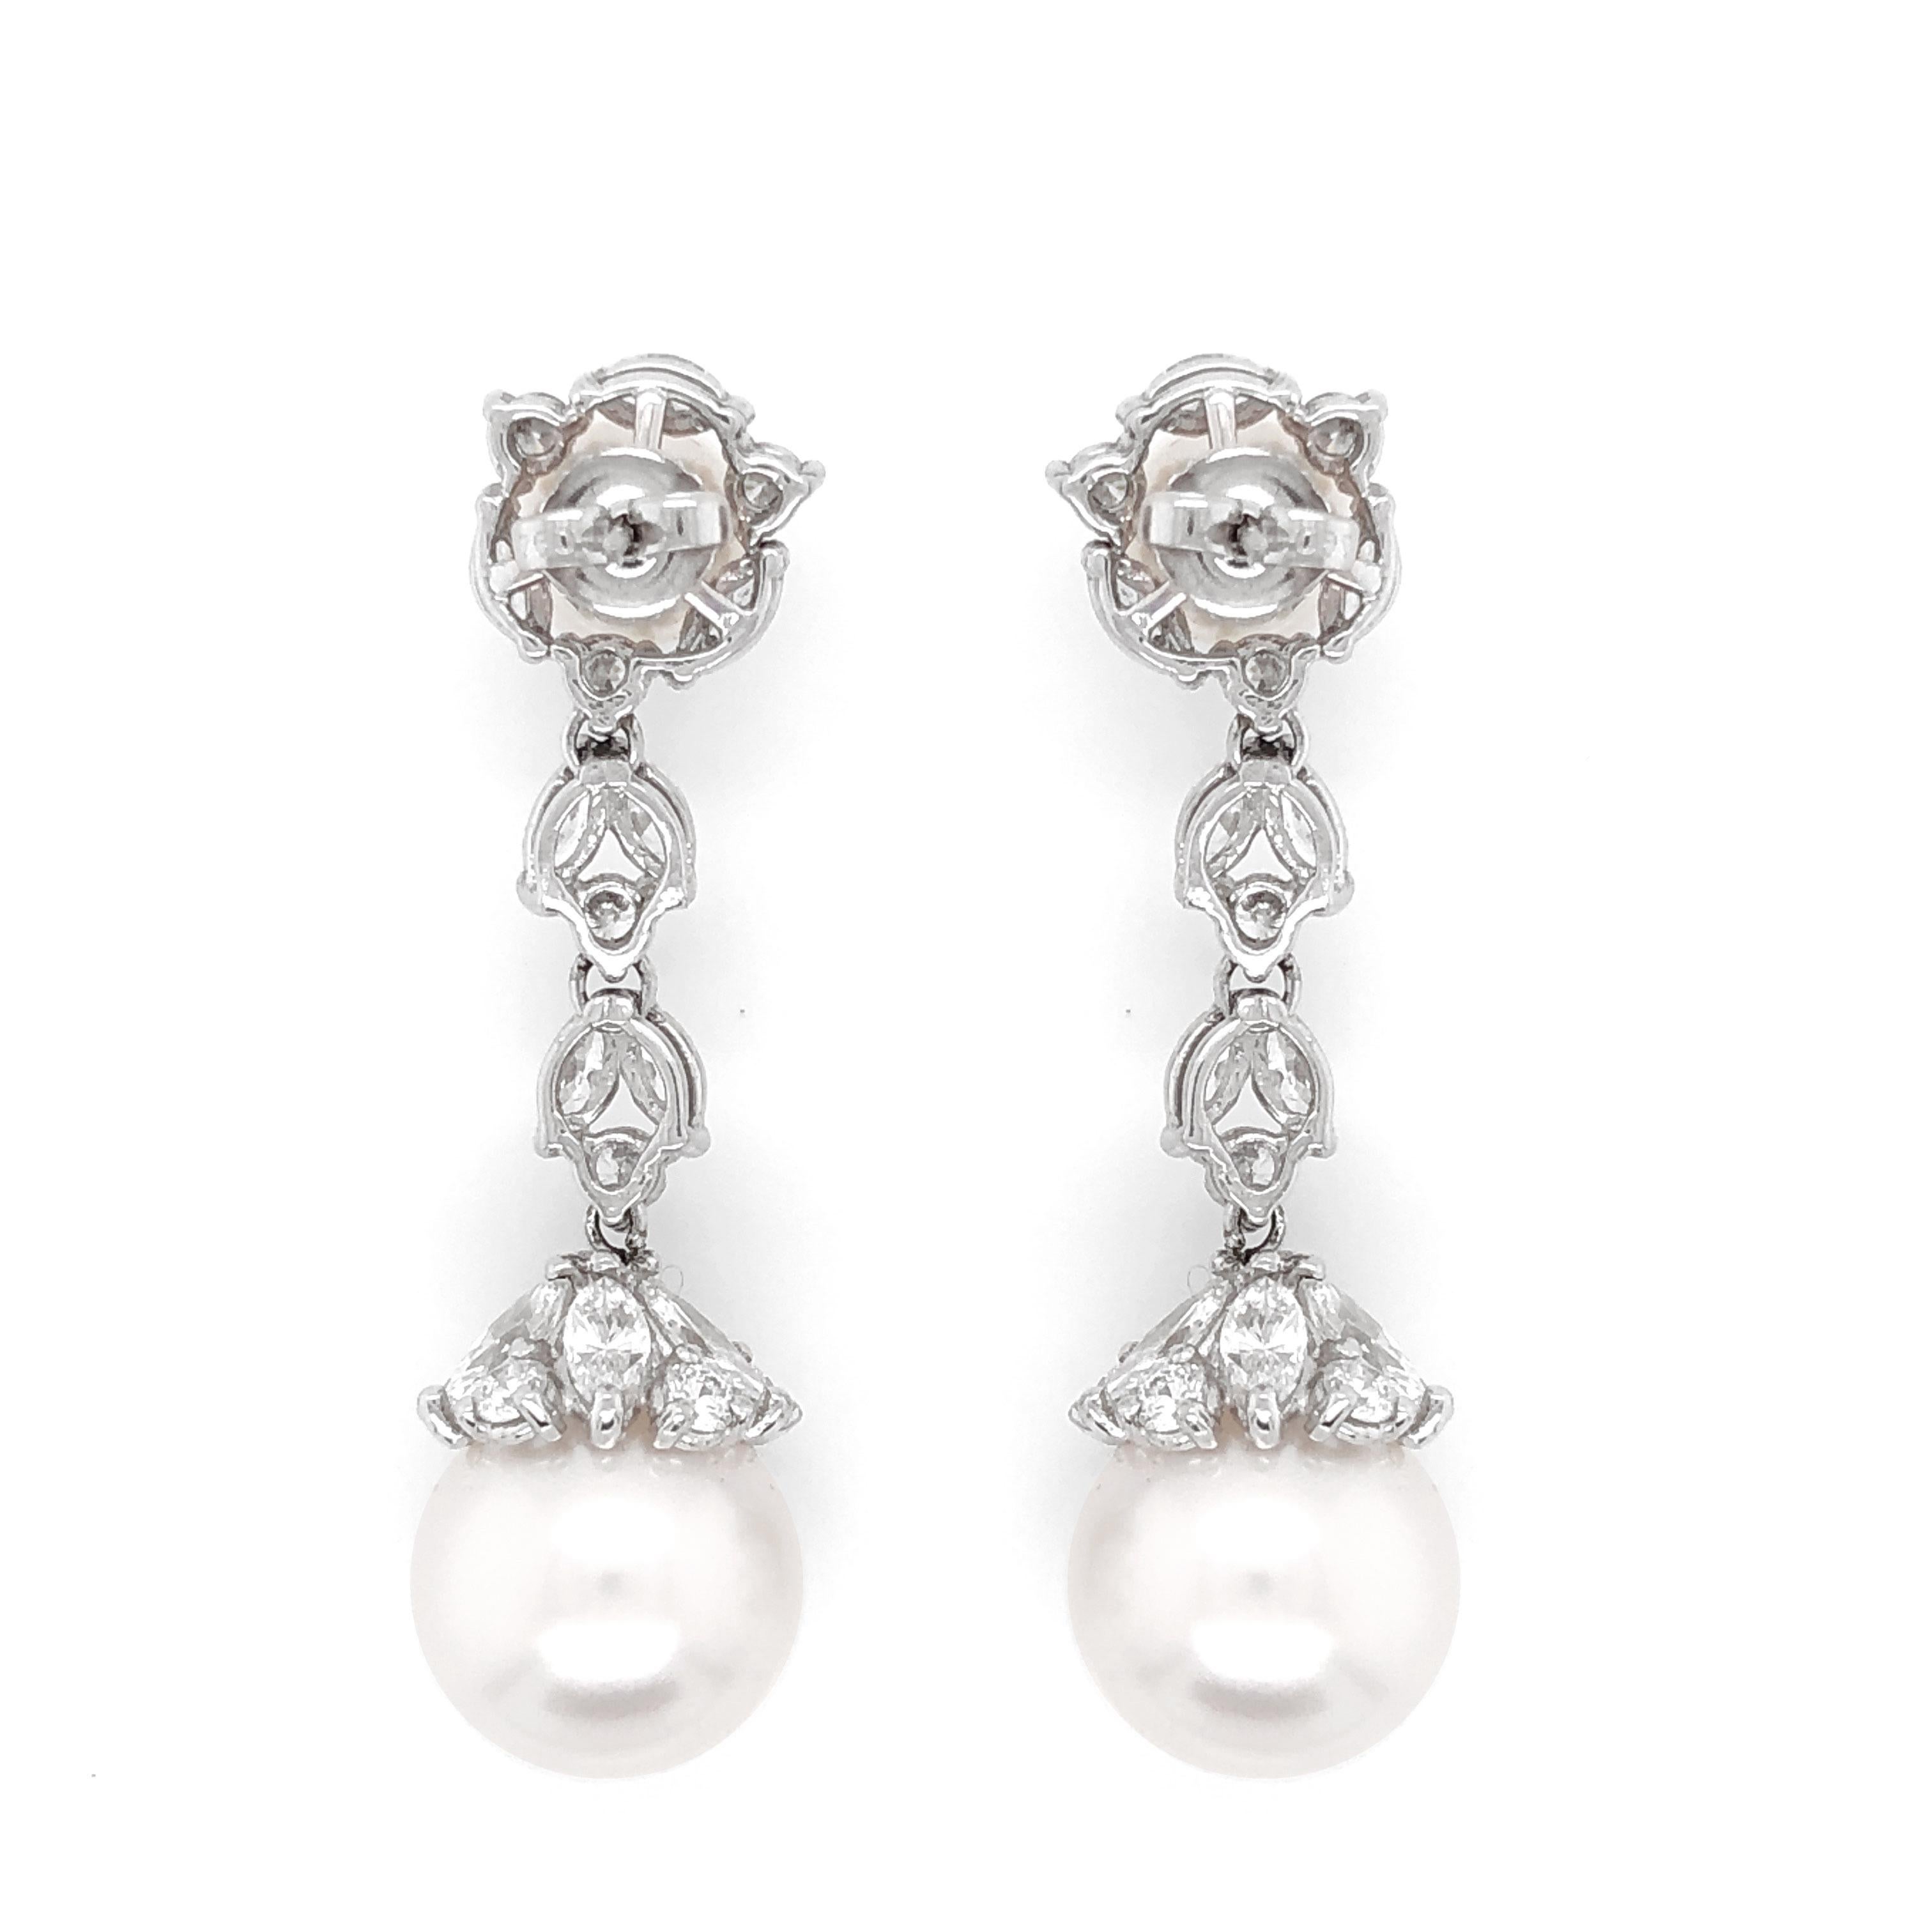 Hanging pearl dangle earrings with round / marquise combination cut natural white diamonds 5.09 ct in total.
Diamonds are in G-H Color Clarity VS. 
Pearls are freshwater and round ( top is 7.5 mm and bottom is 13.8 mm ).
Classic back stud.  
Length: